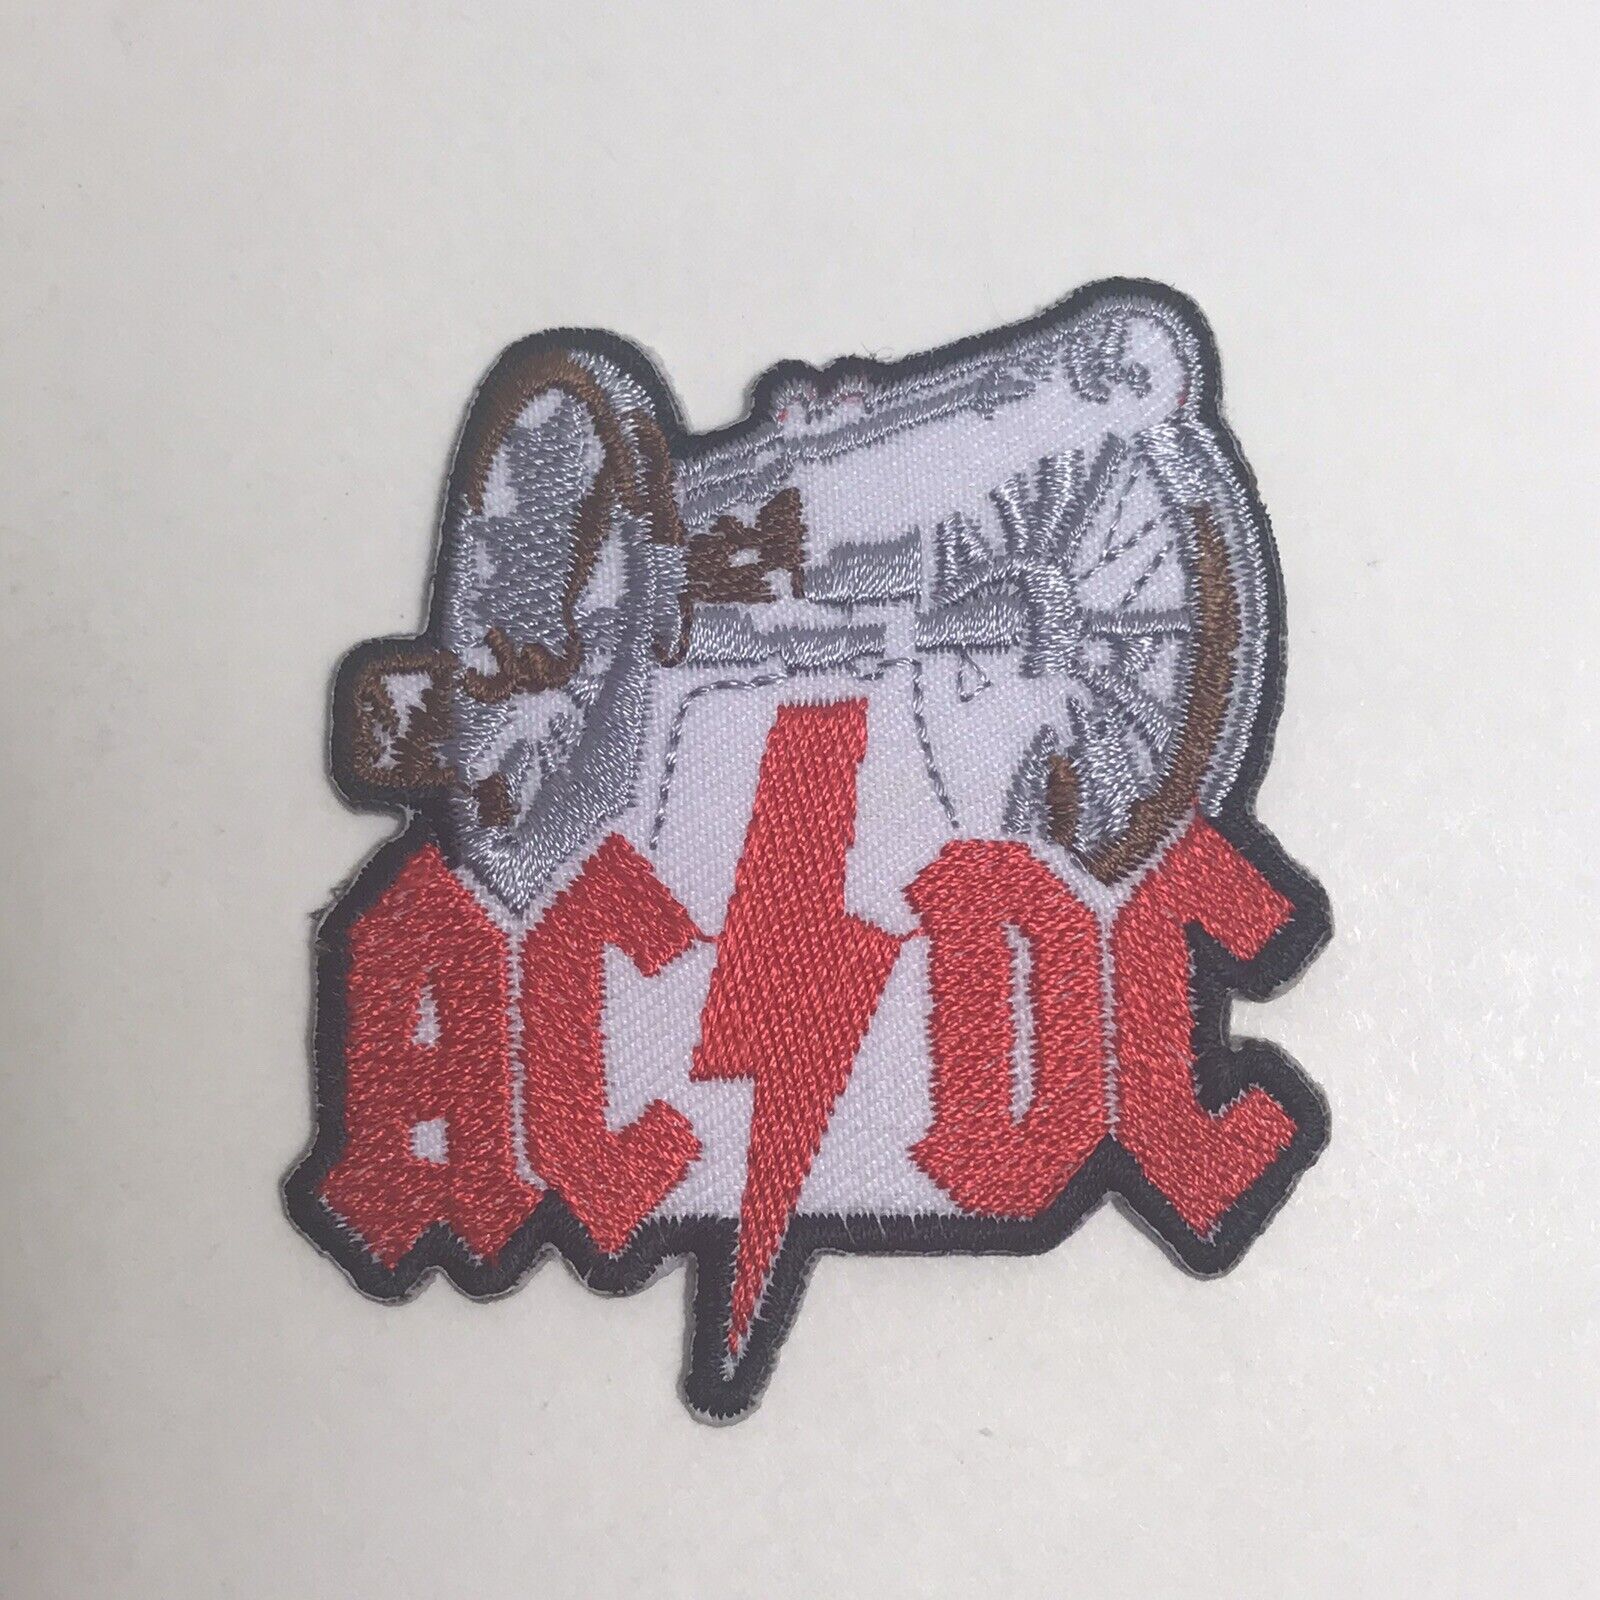 Ac/dc Embroidered Sew Iron On Patch Badge  Rock Metal Cannon